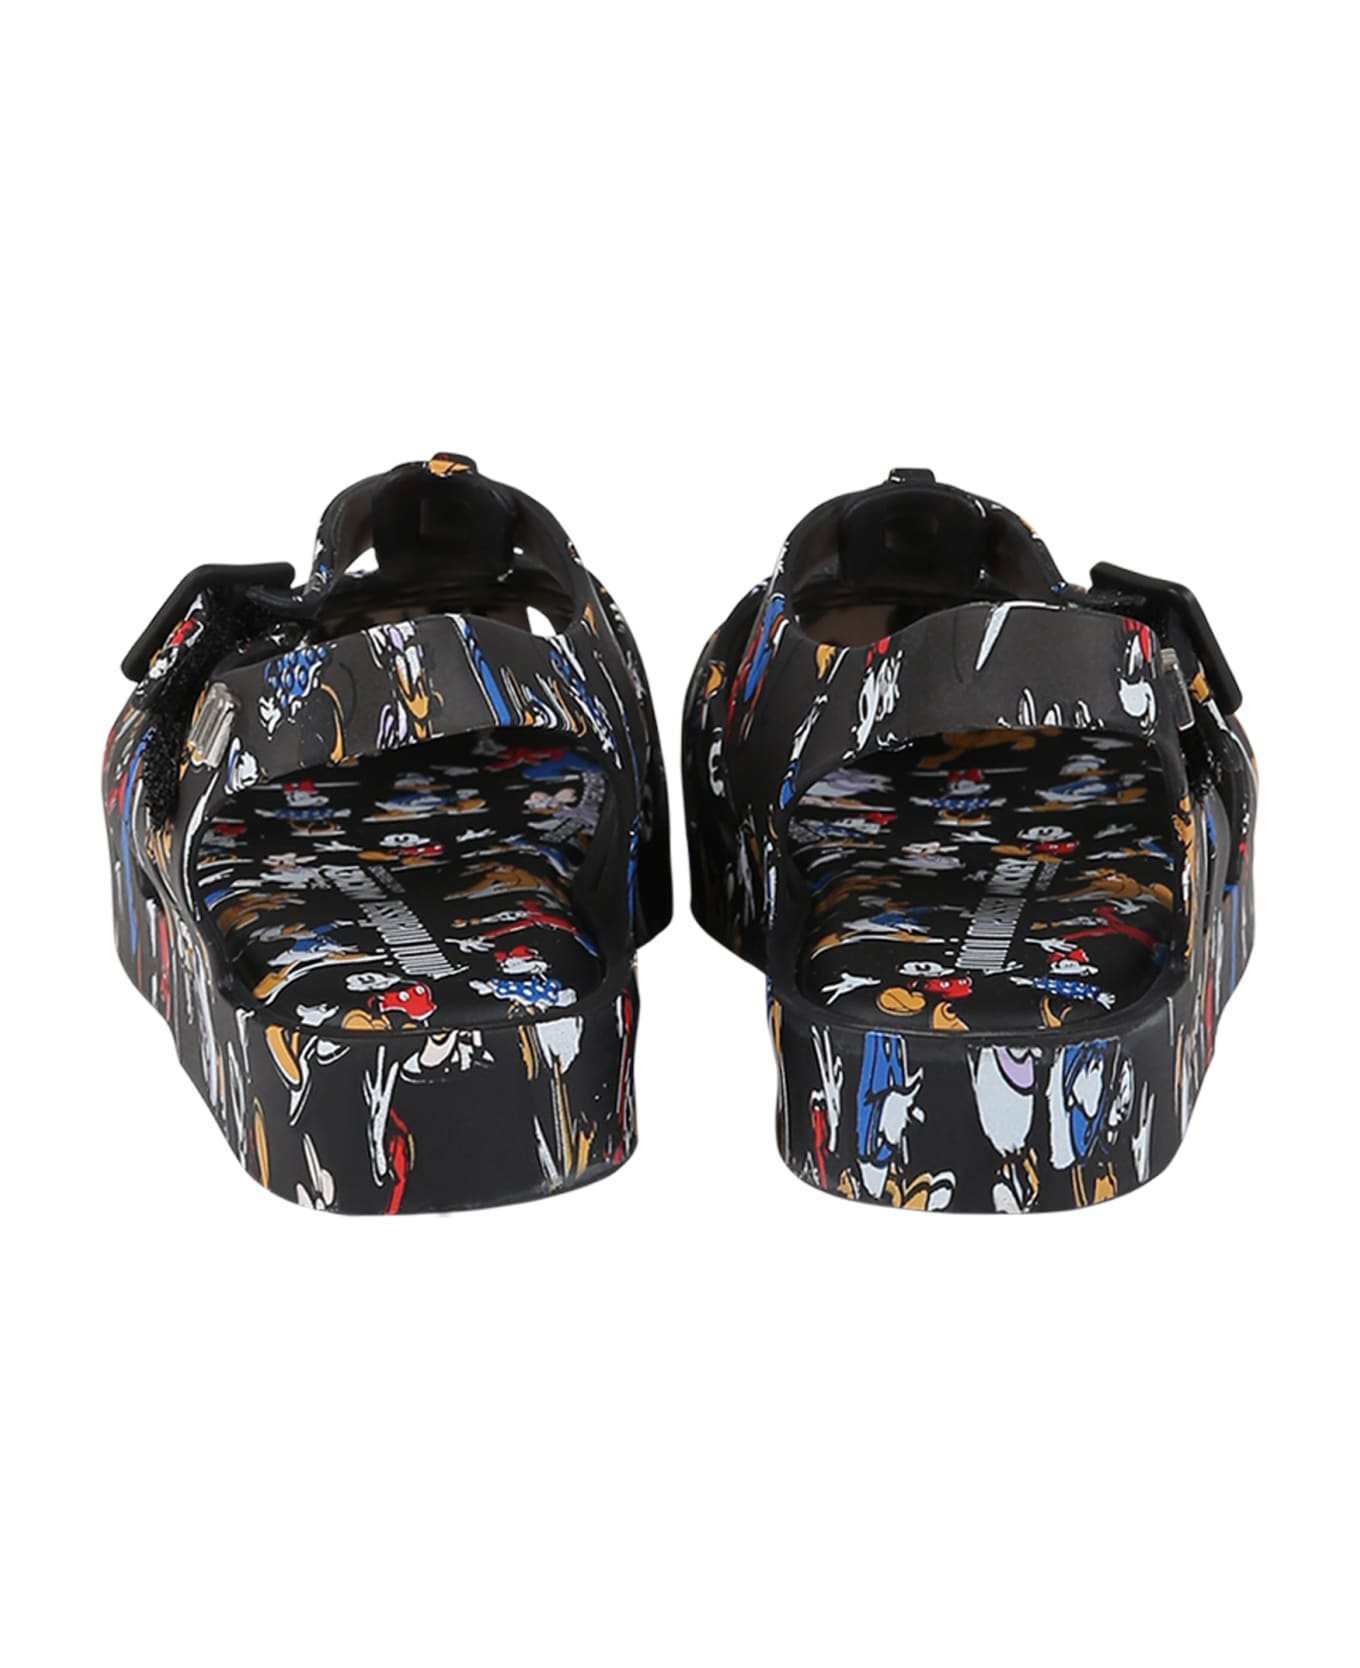 Melissa Black Sandals For Boy With Disney Characters - Black シューズ